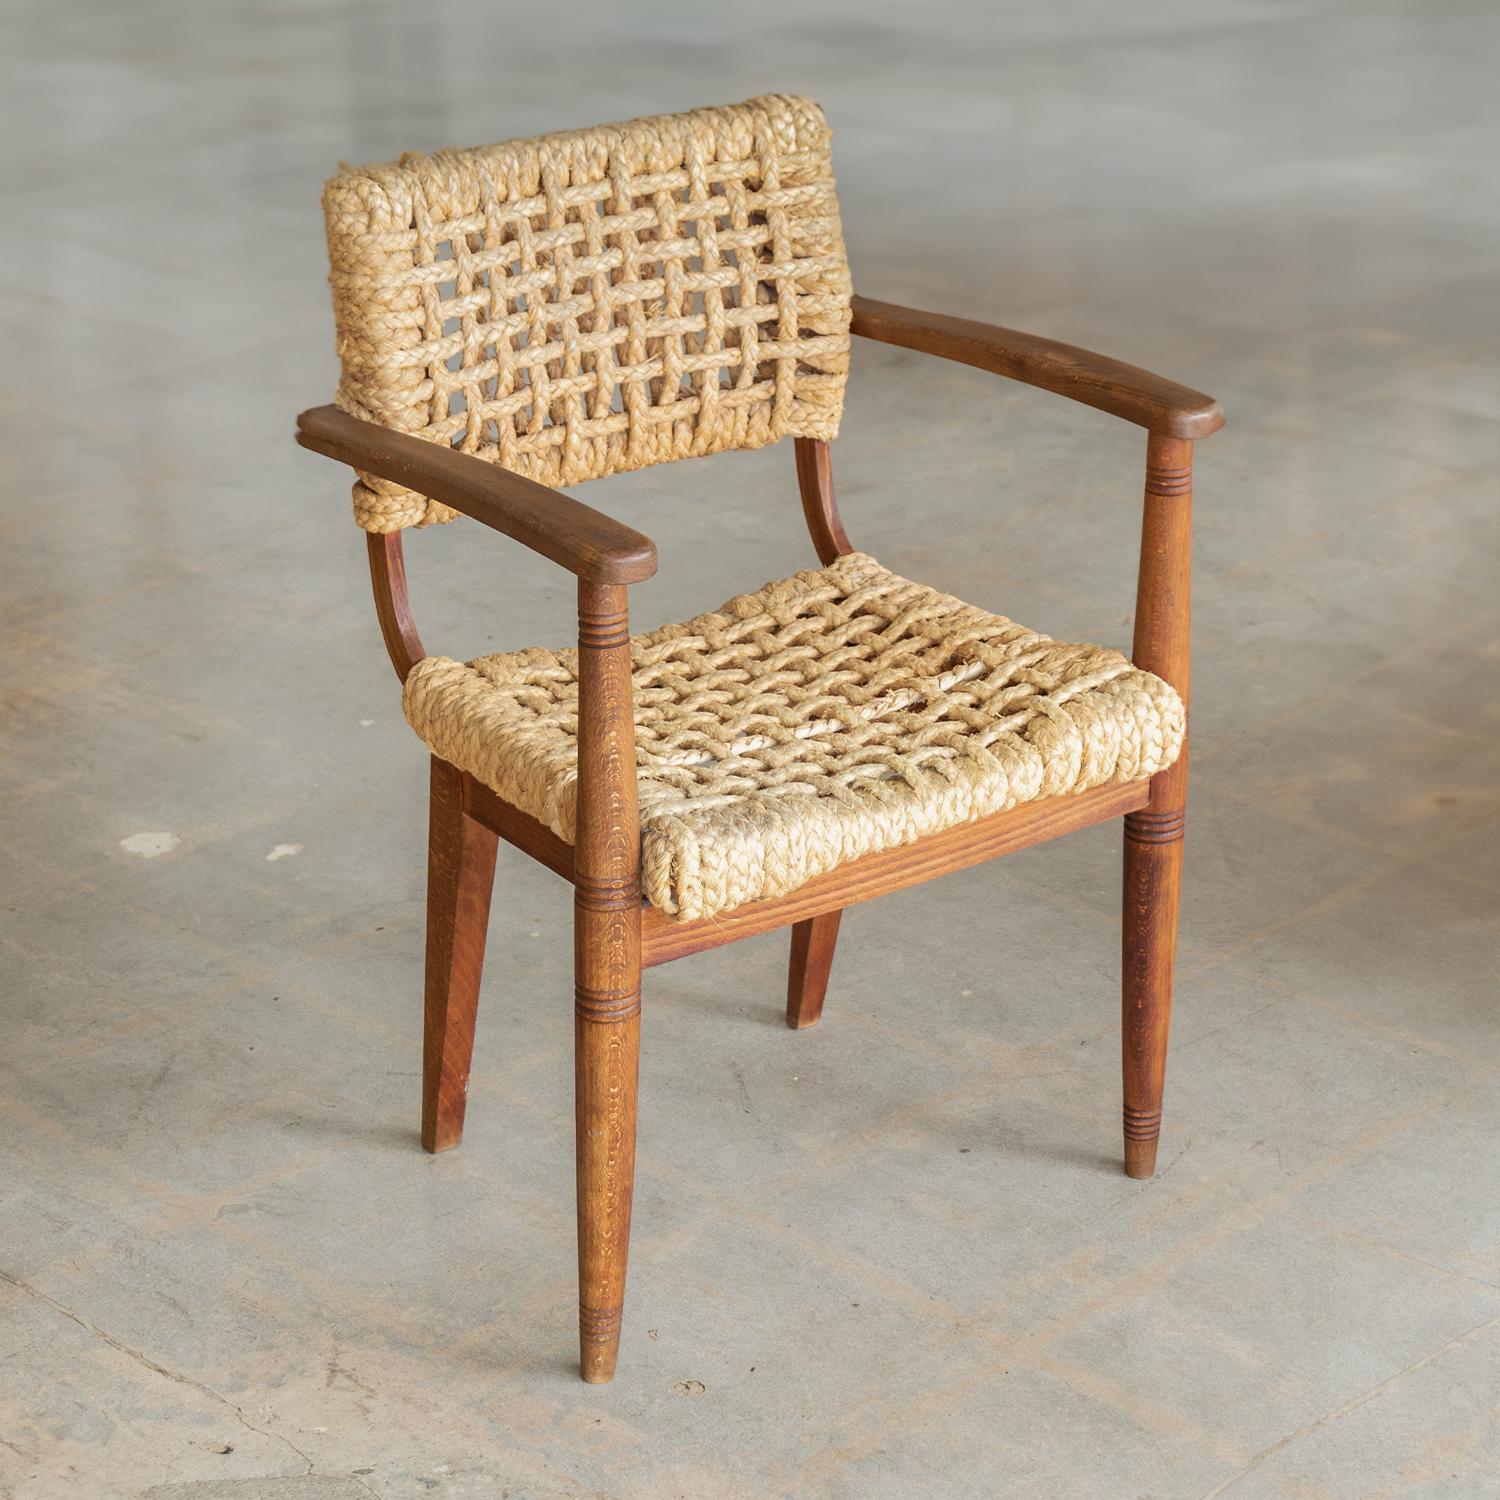 Vintage Adrien Audoux & Frida Minet lounge chair from France, 1950s. All original wood with nice patina and age. Original rope seat has one newly replaced cord. Beautiful carved detailing on arms. Stunning and iconic piece.